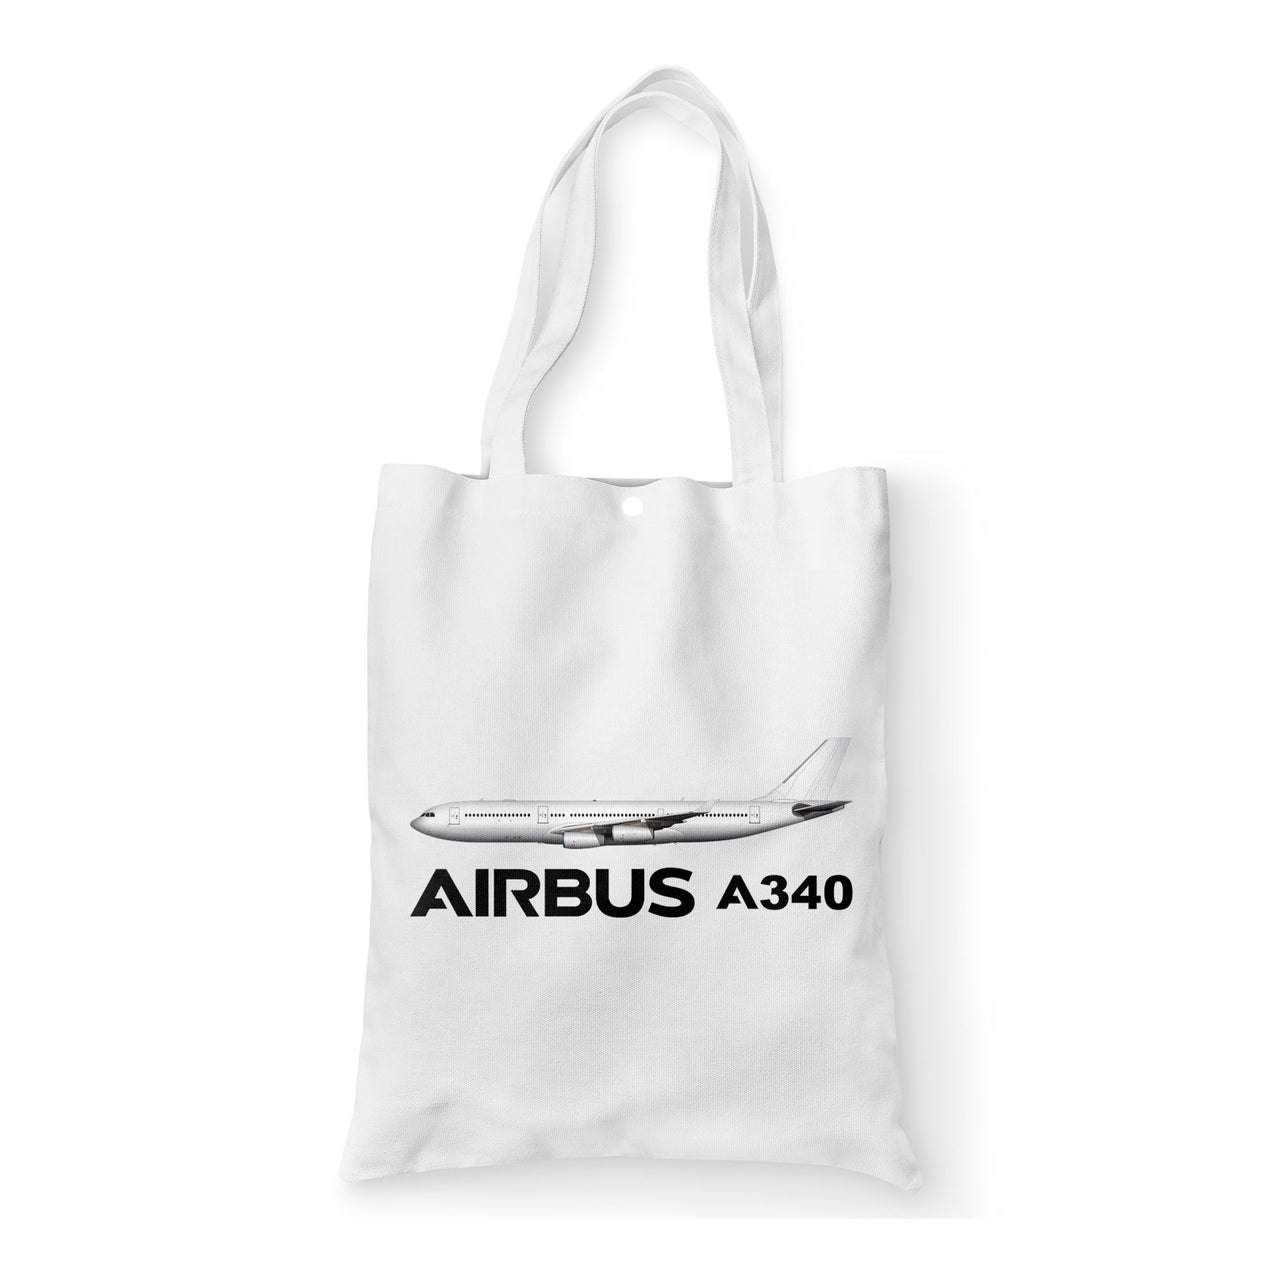 The Airbus A340 Designed Tote Bags